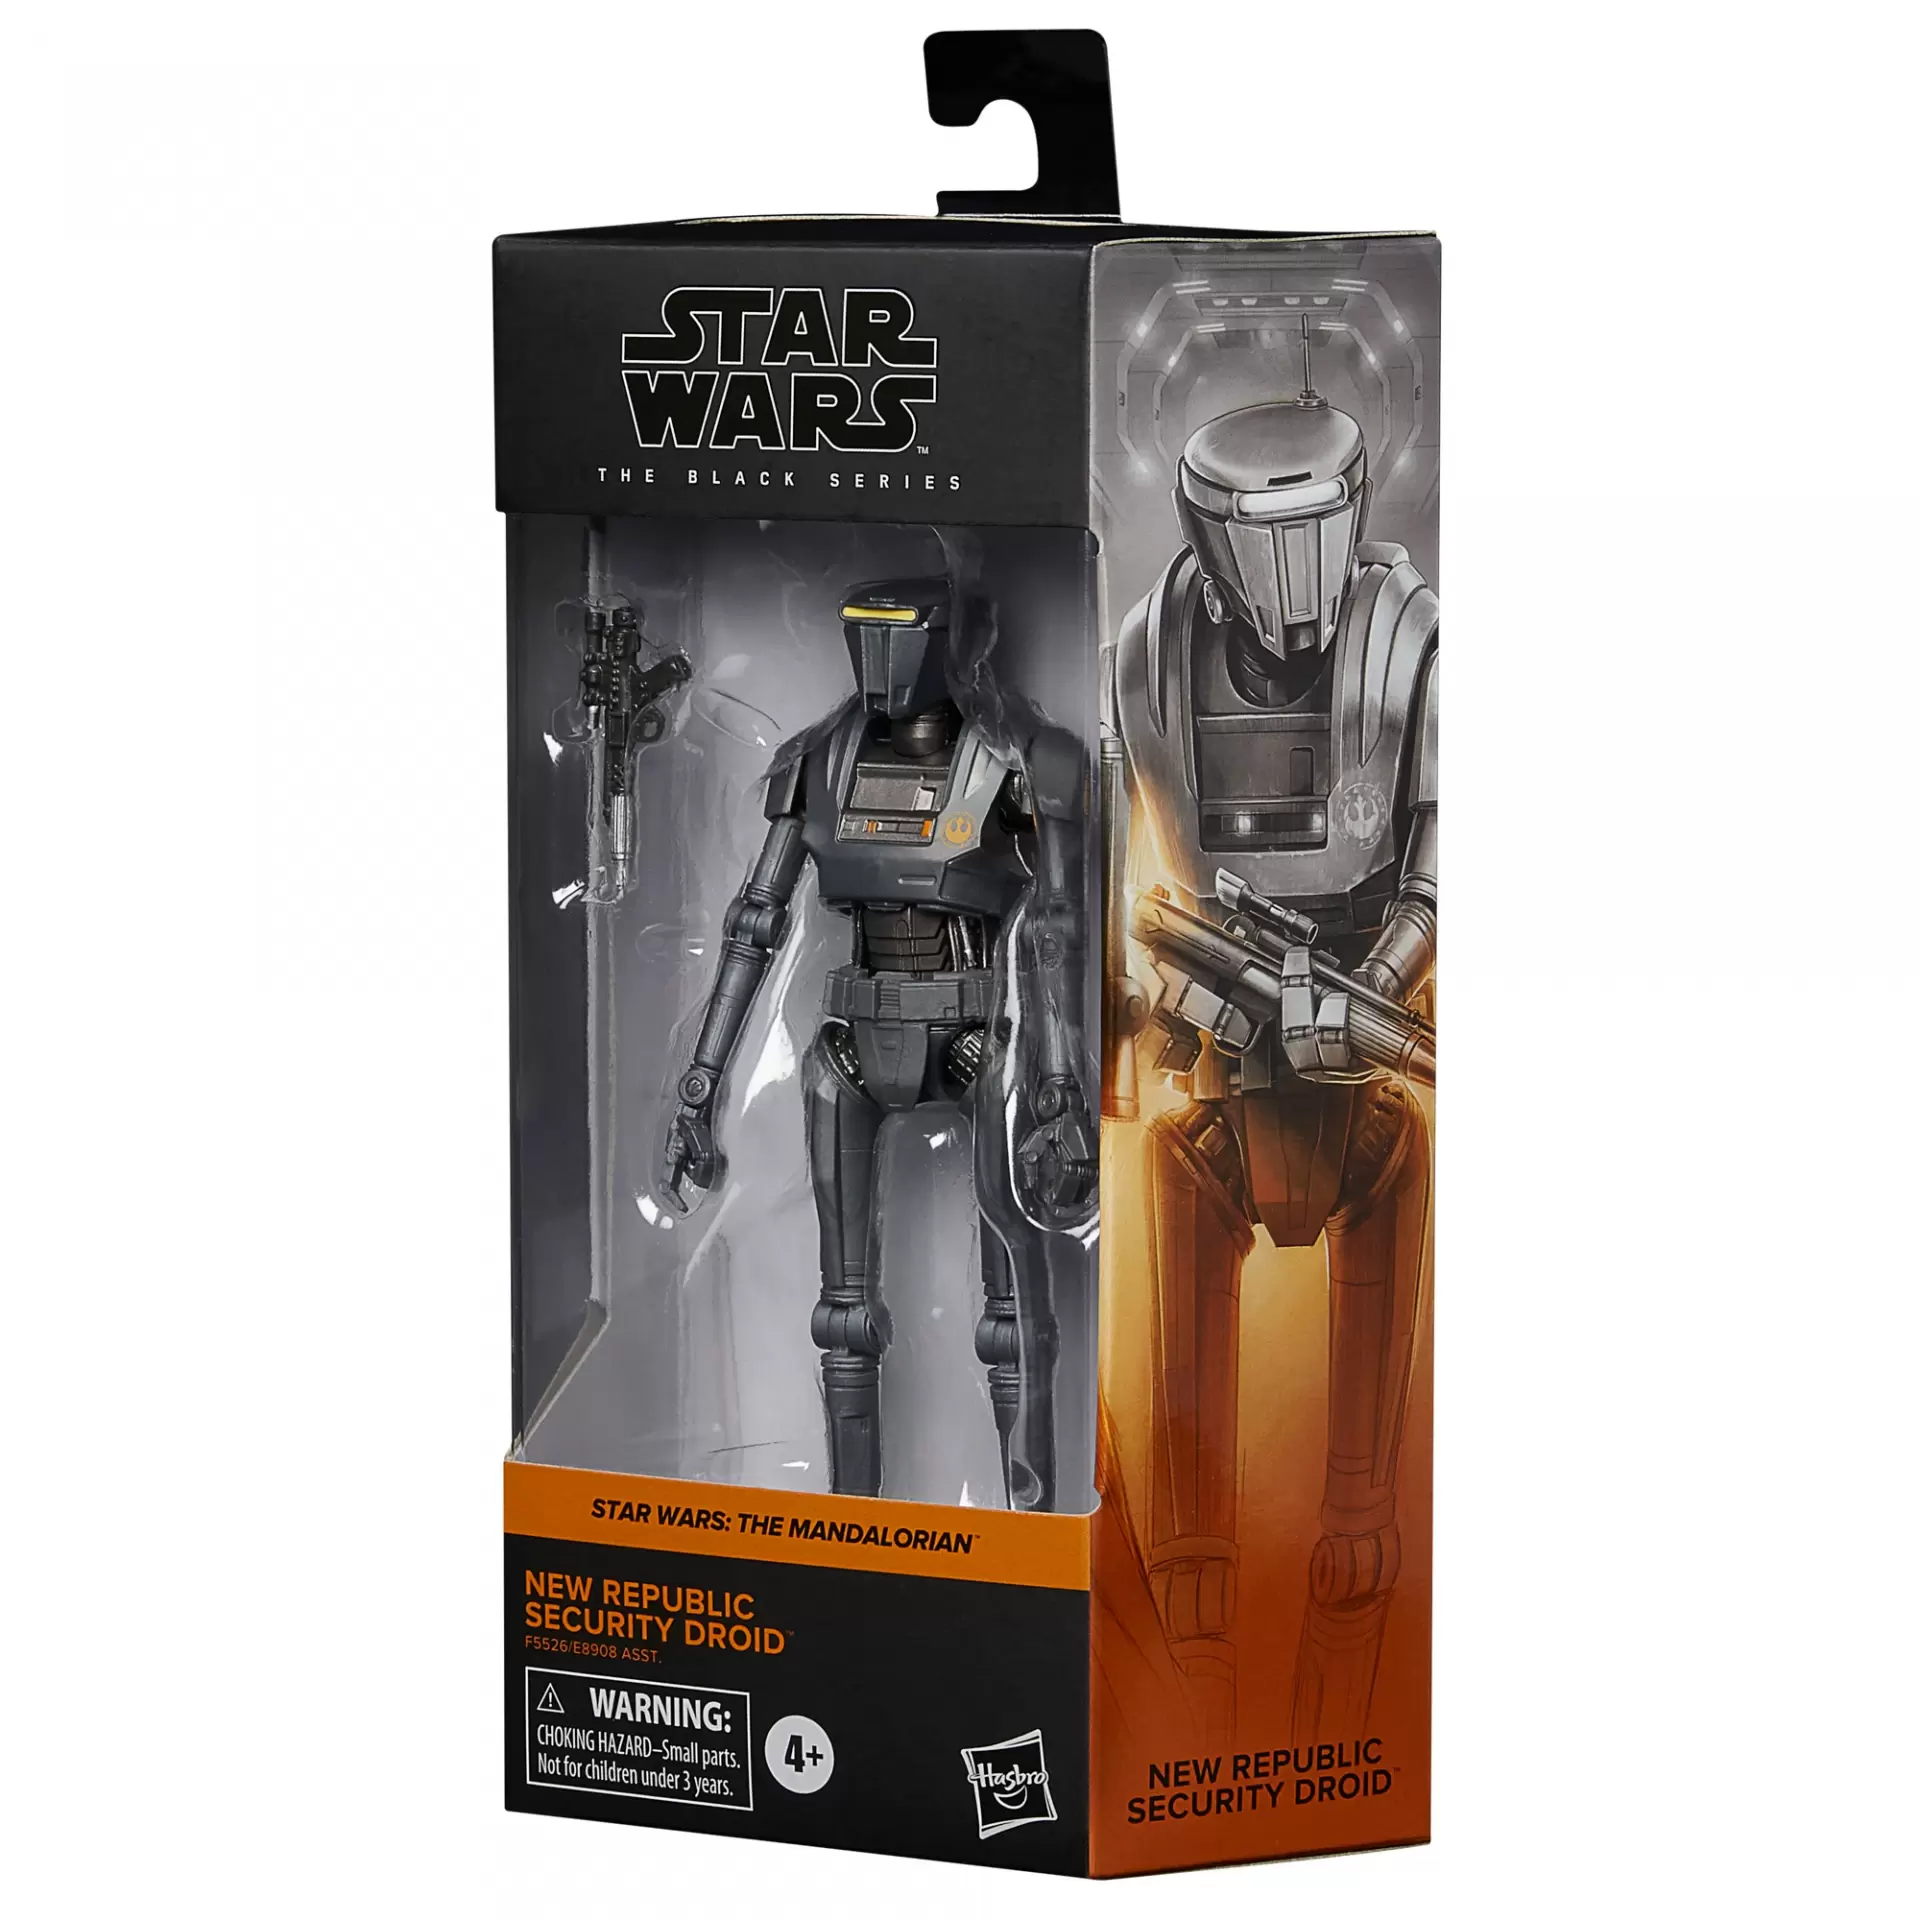 Star wars the black series new republic security droid jawascave 11